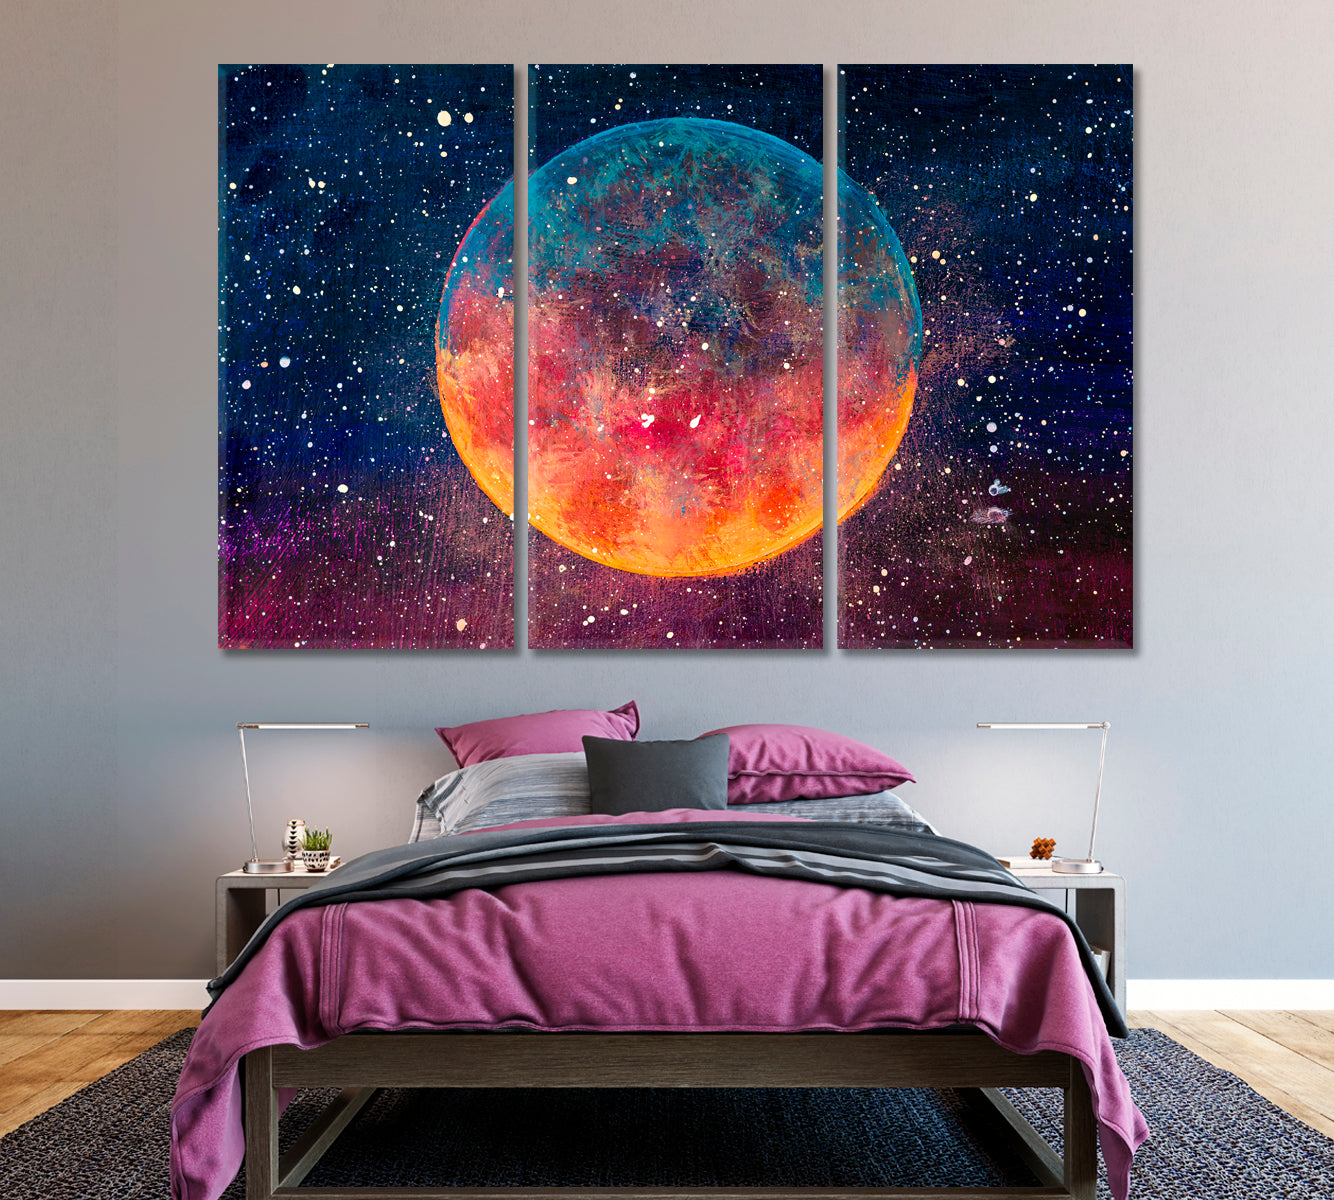 Fantasy Space Canvas Print ArtLexy 3 Panels 36"x24" inches 